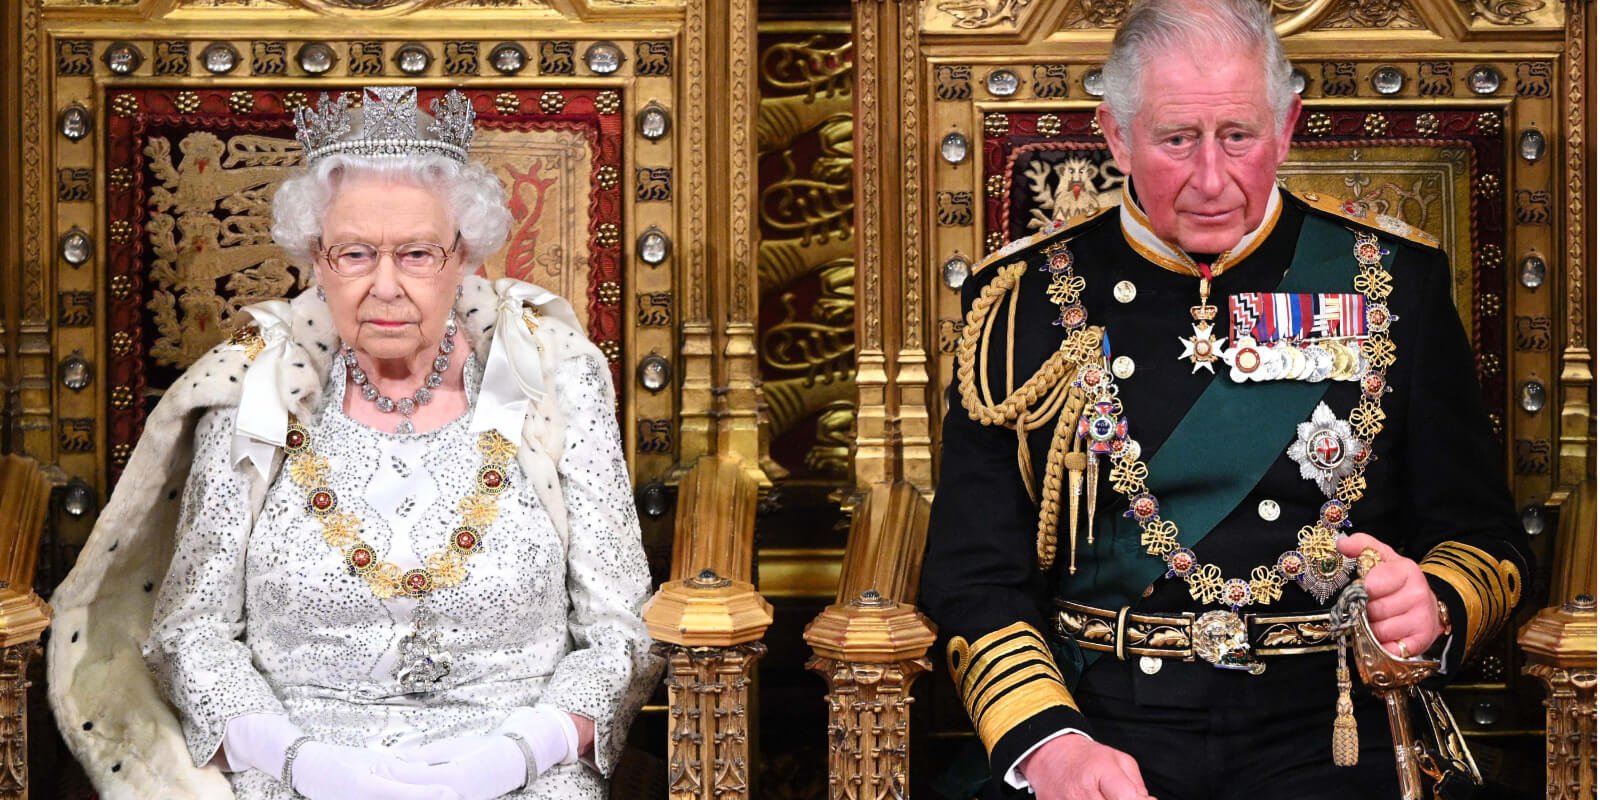 Queen Elizabeth and King Charles at the State Opening of Parliament at the Palace of Westminster on October 14, 2019, in London, England.